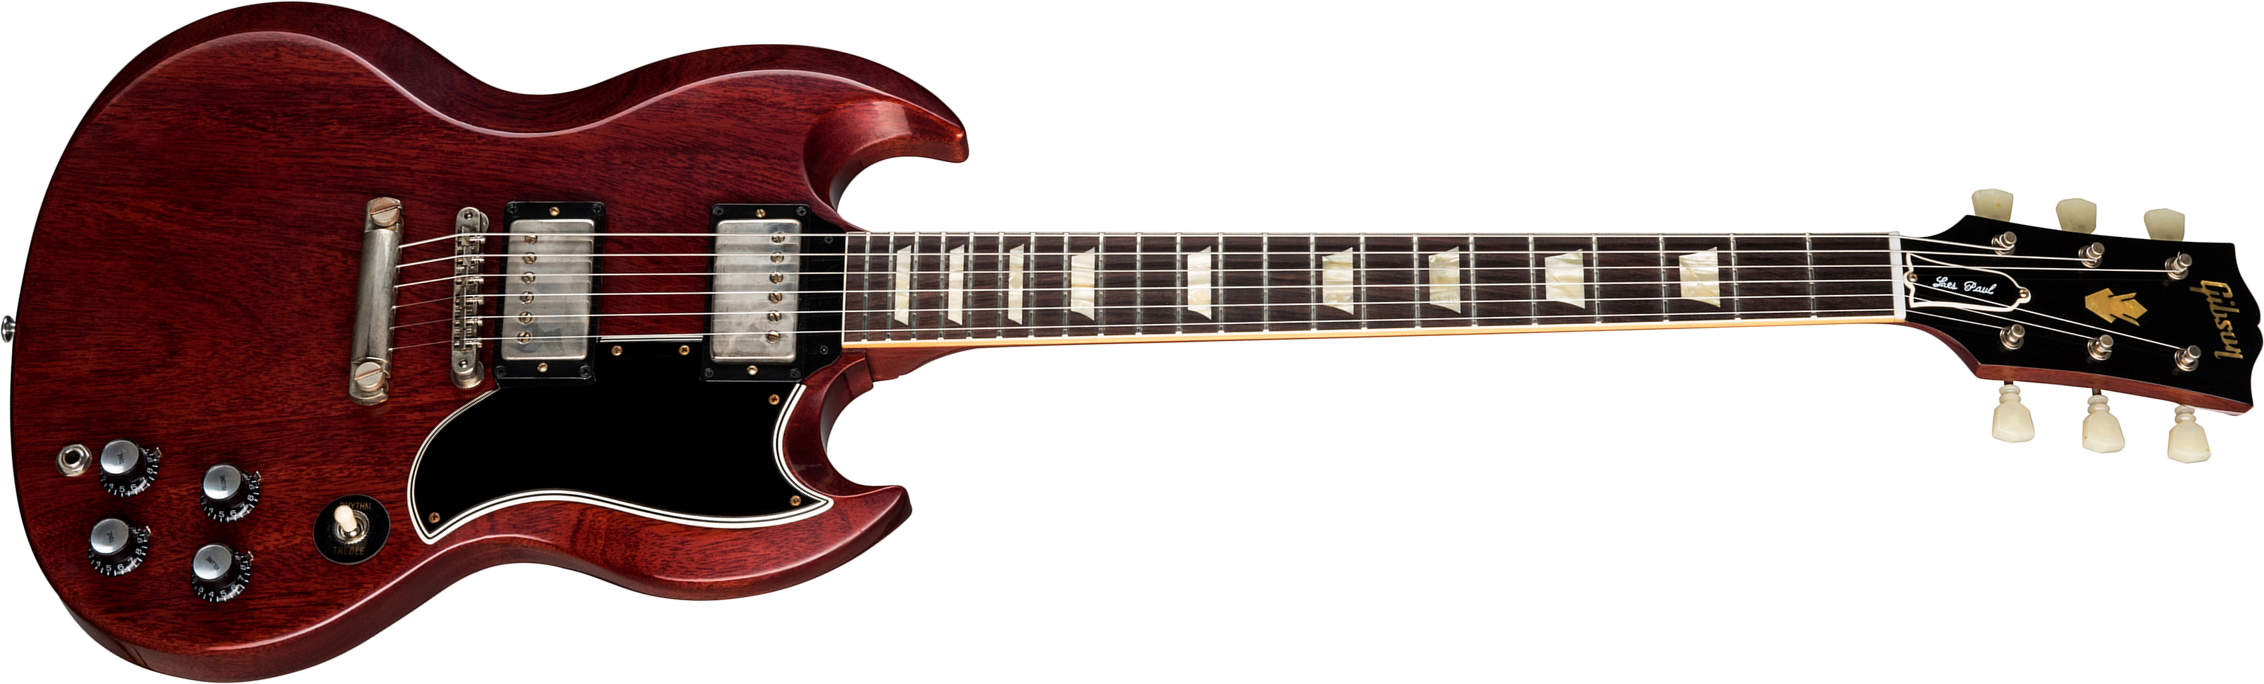 Gibson Custom Shop Sg Standard 1961 Reissue Stop Bar 2019 2h Ht Rw Rw - Vos Cherry Red - Double cut electric guitar - Main picture